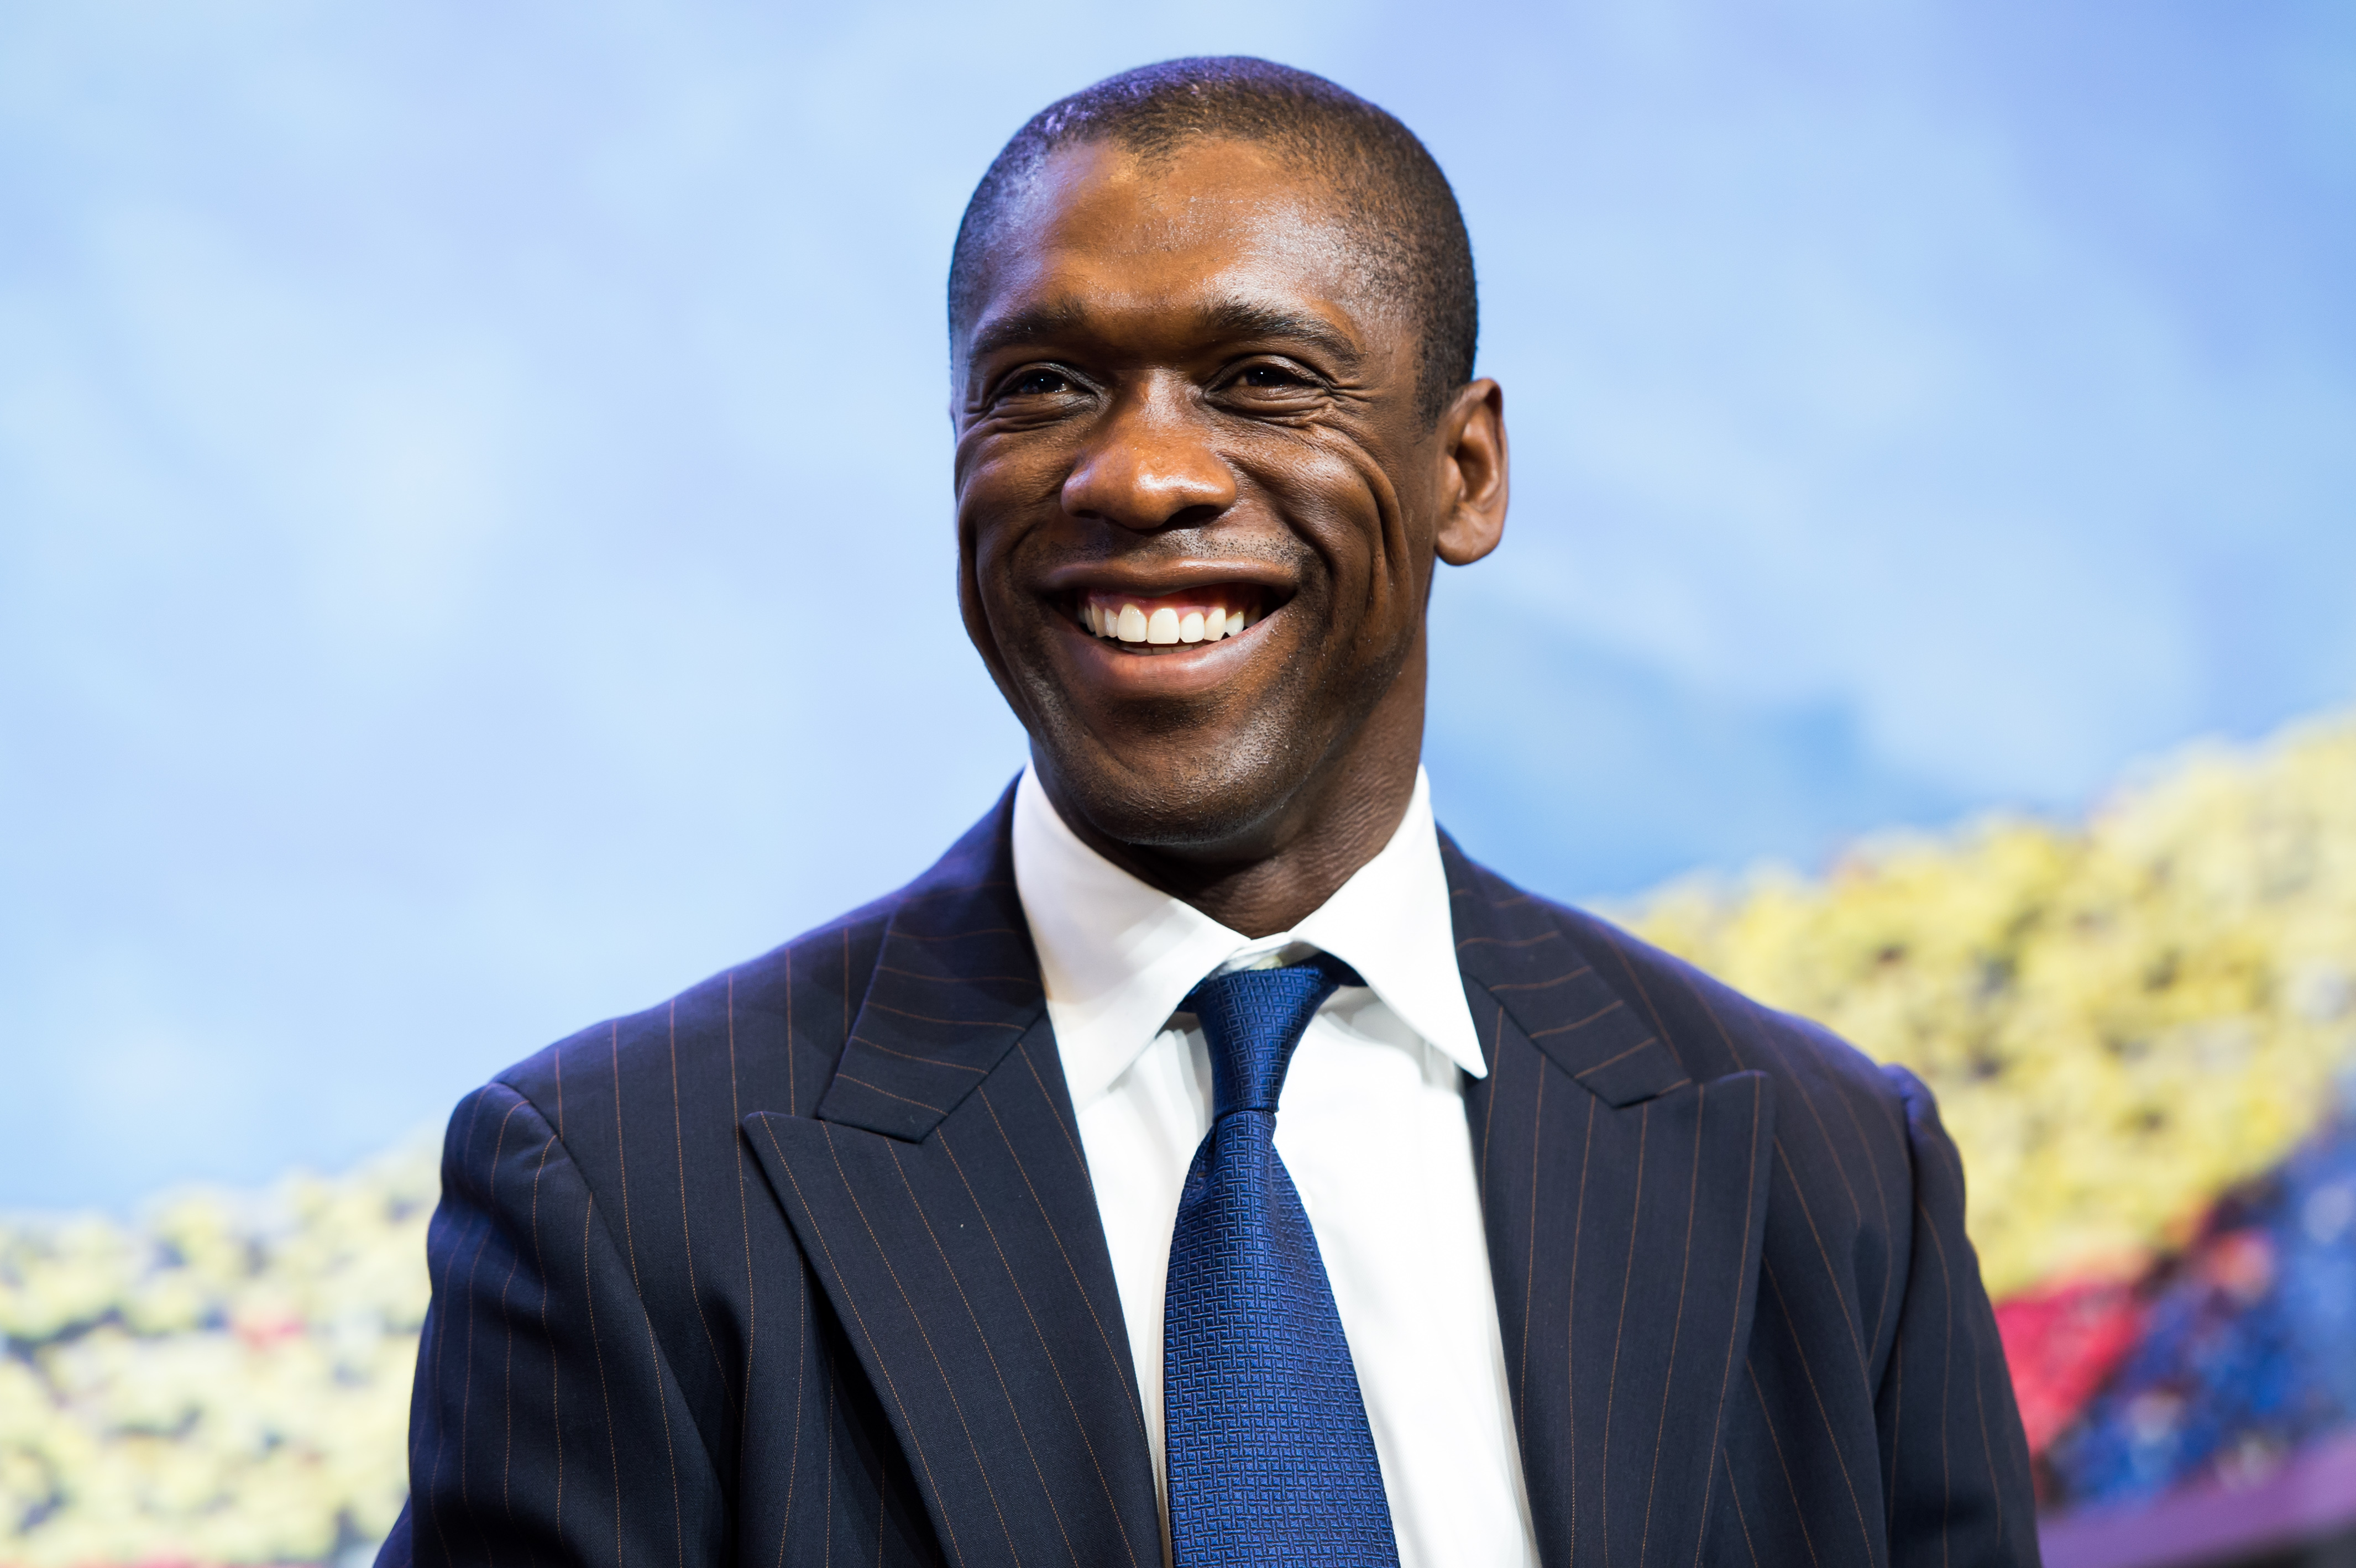 BARCELONA, SPAIN - JUNE 12:  UEFA Global Ambassador for Diversity and Change Clarence Seedorf attends the Fare 2015 Barcelona Conference at Camp Nou on June 12, 2015 in Barcelona, Spain.  (Photo by Alex Caparros/Getty Images) *** Local Caption *** Clarence Seedorf